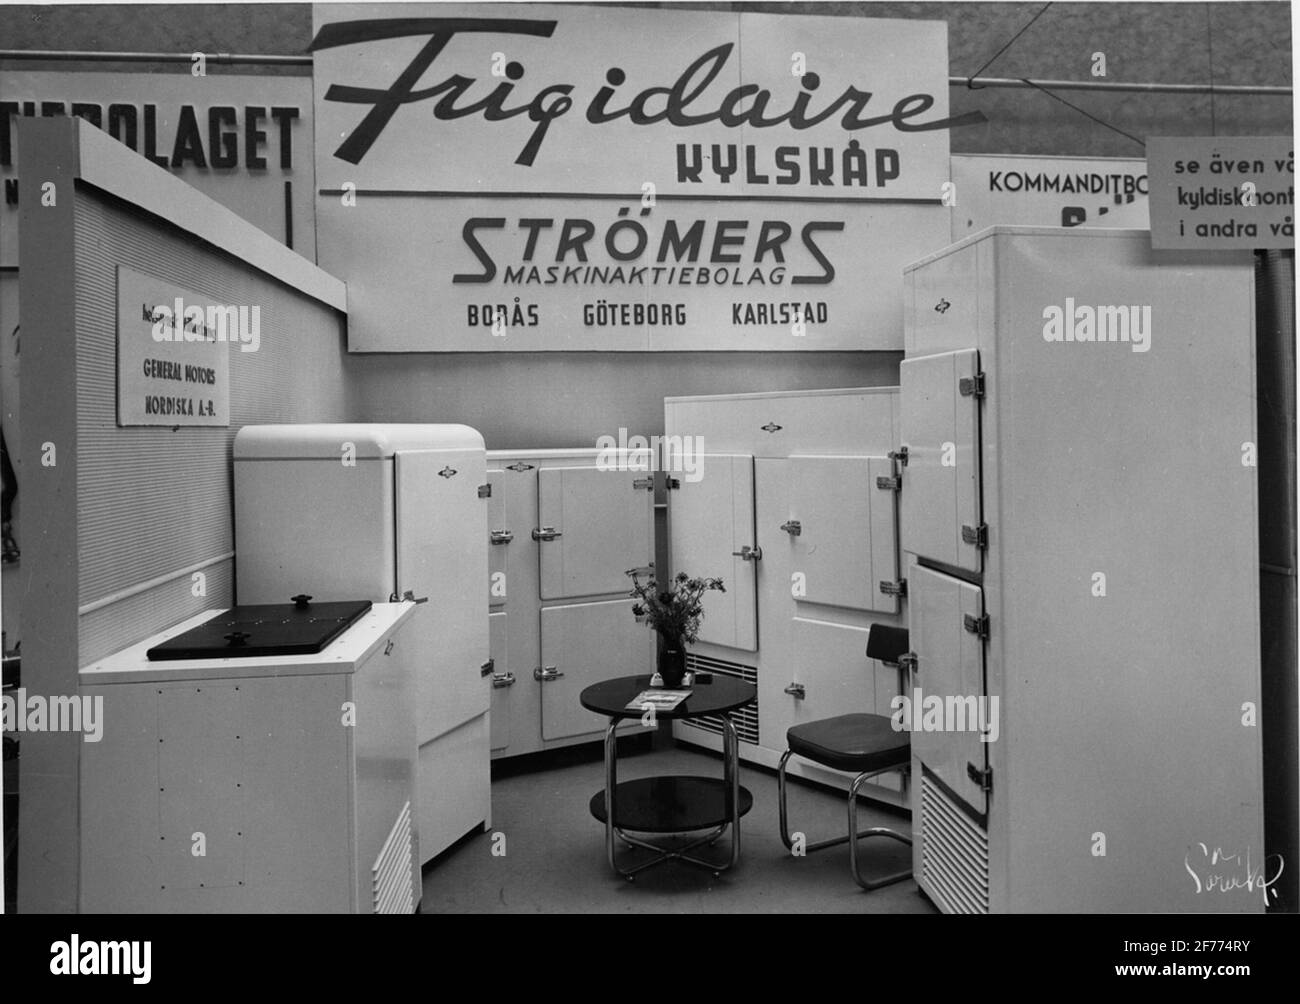 The Swedish Fair in 1943. Streamers Makinaktiebolags stand for Frigidaire Refrigerator. Stock Photo